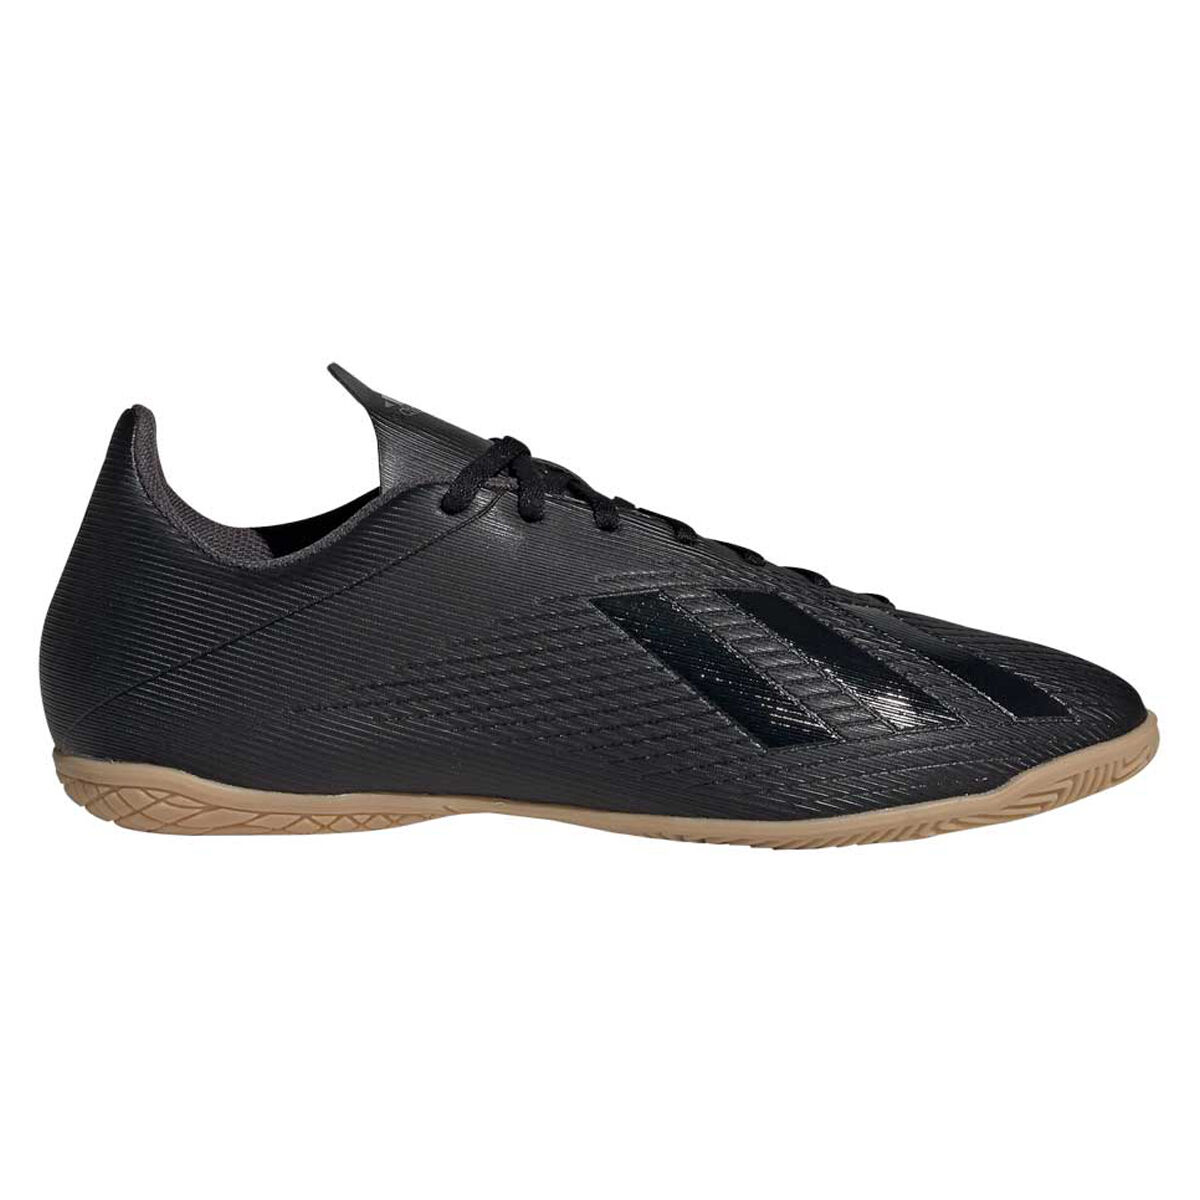 adidas x indoor soccer shoes